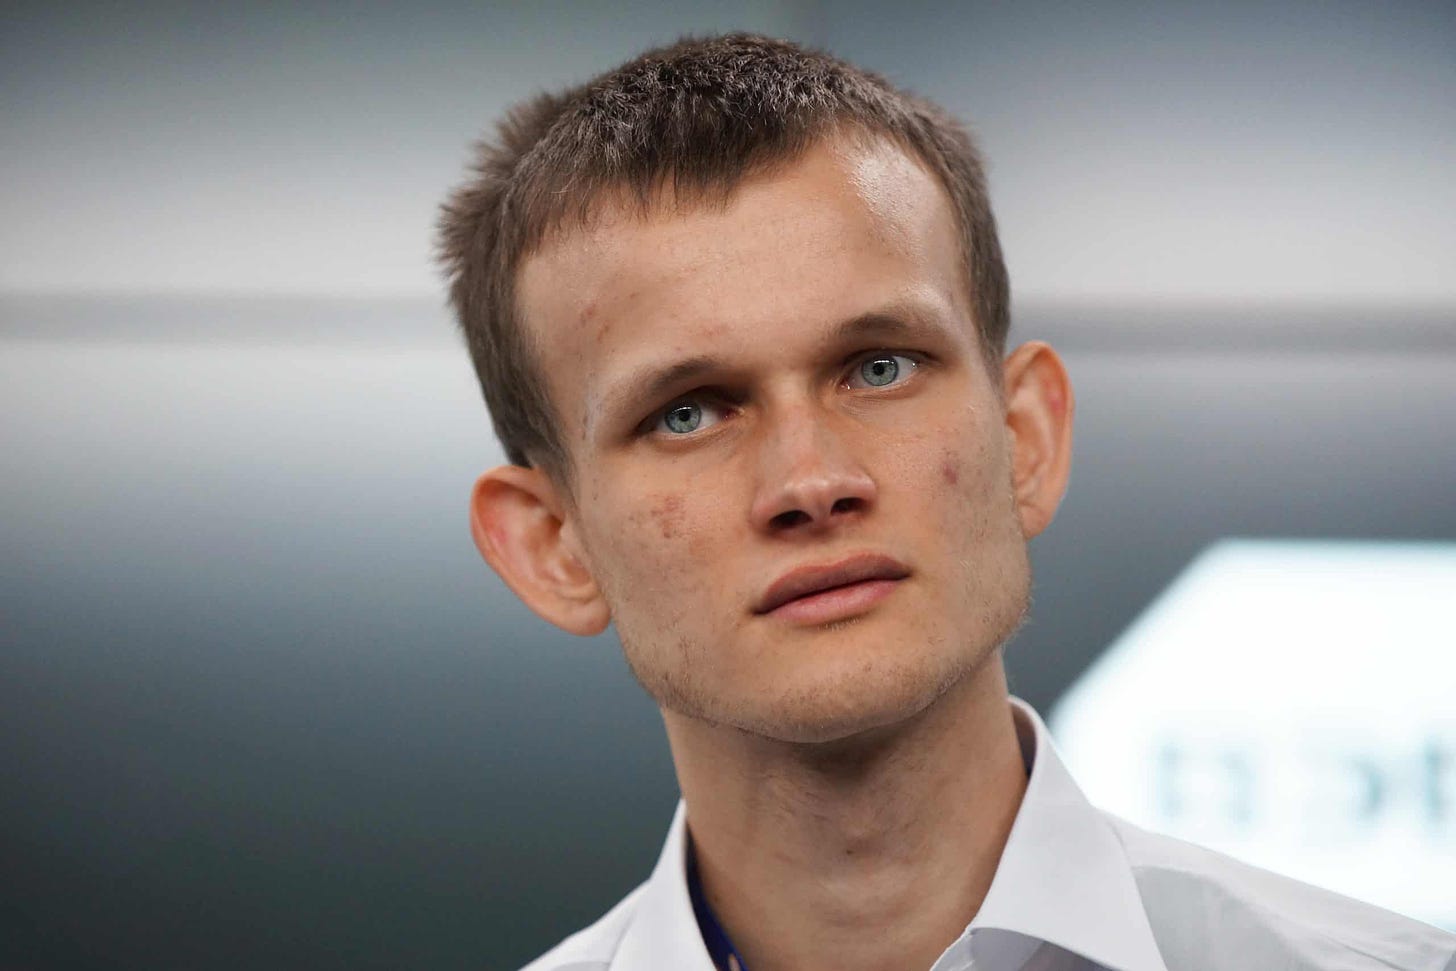 Ethereum's Vitalik Buterin, Crypto's Most Enigmatic Personality